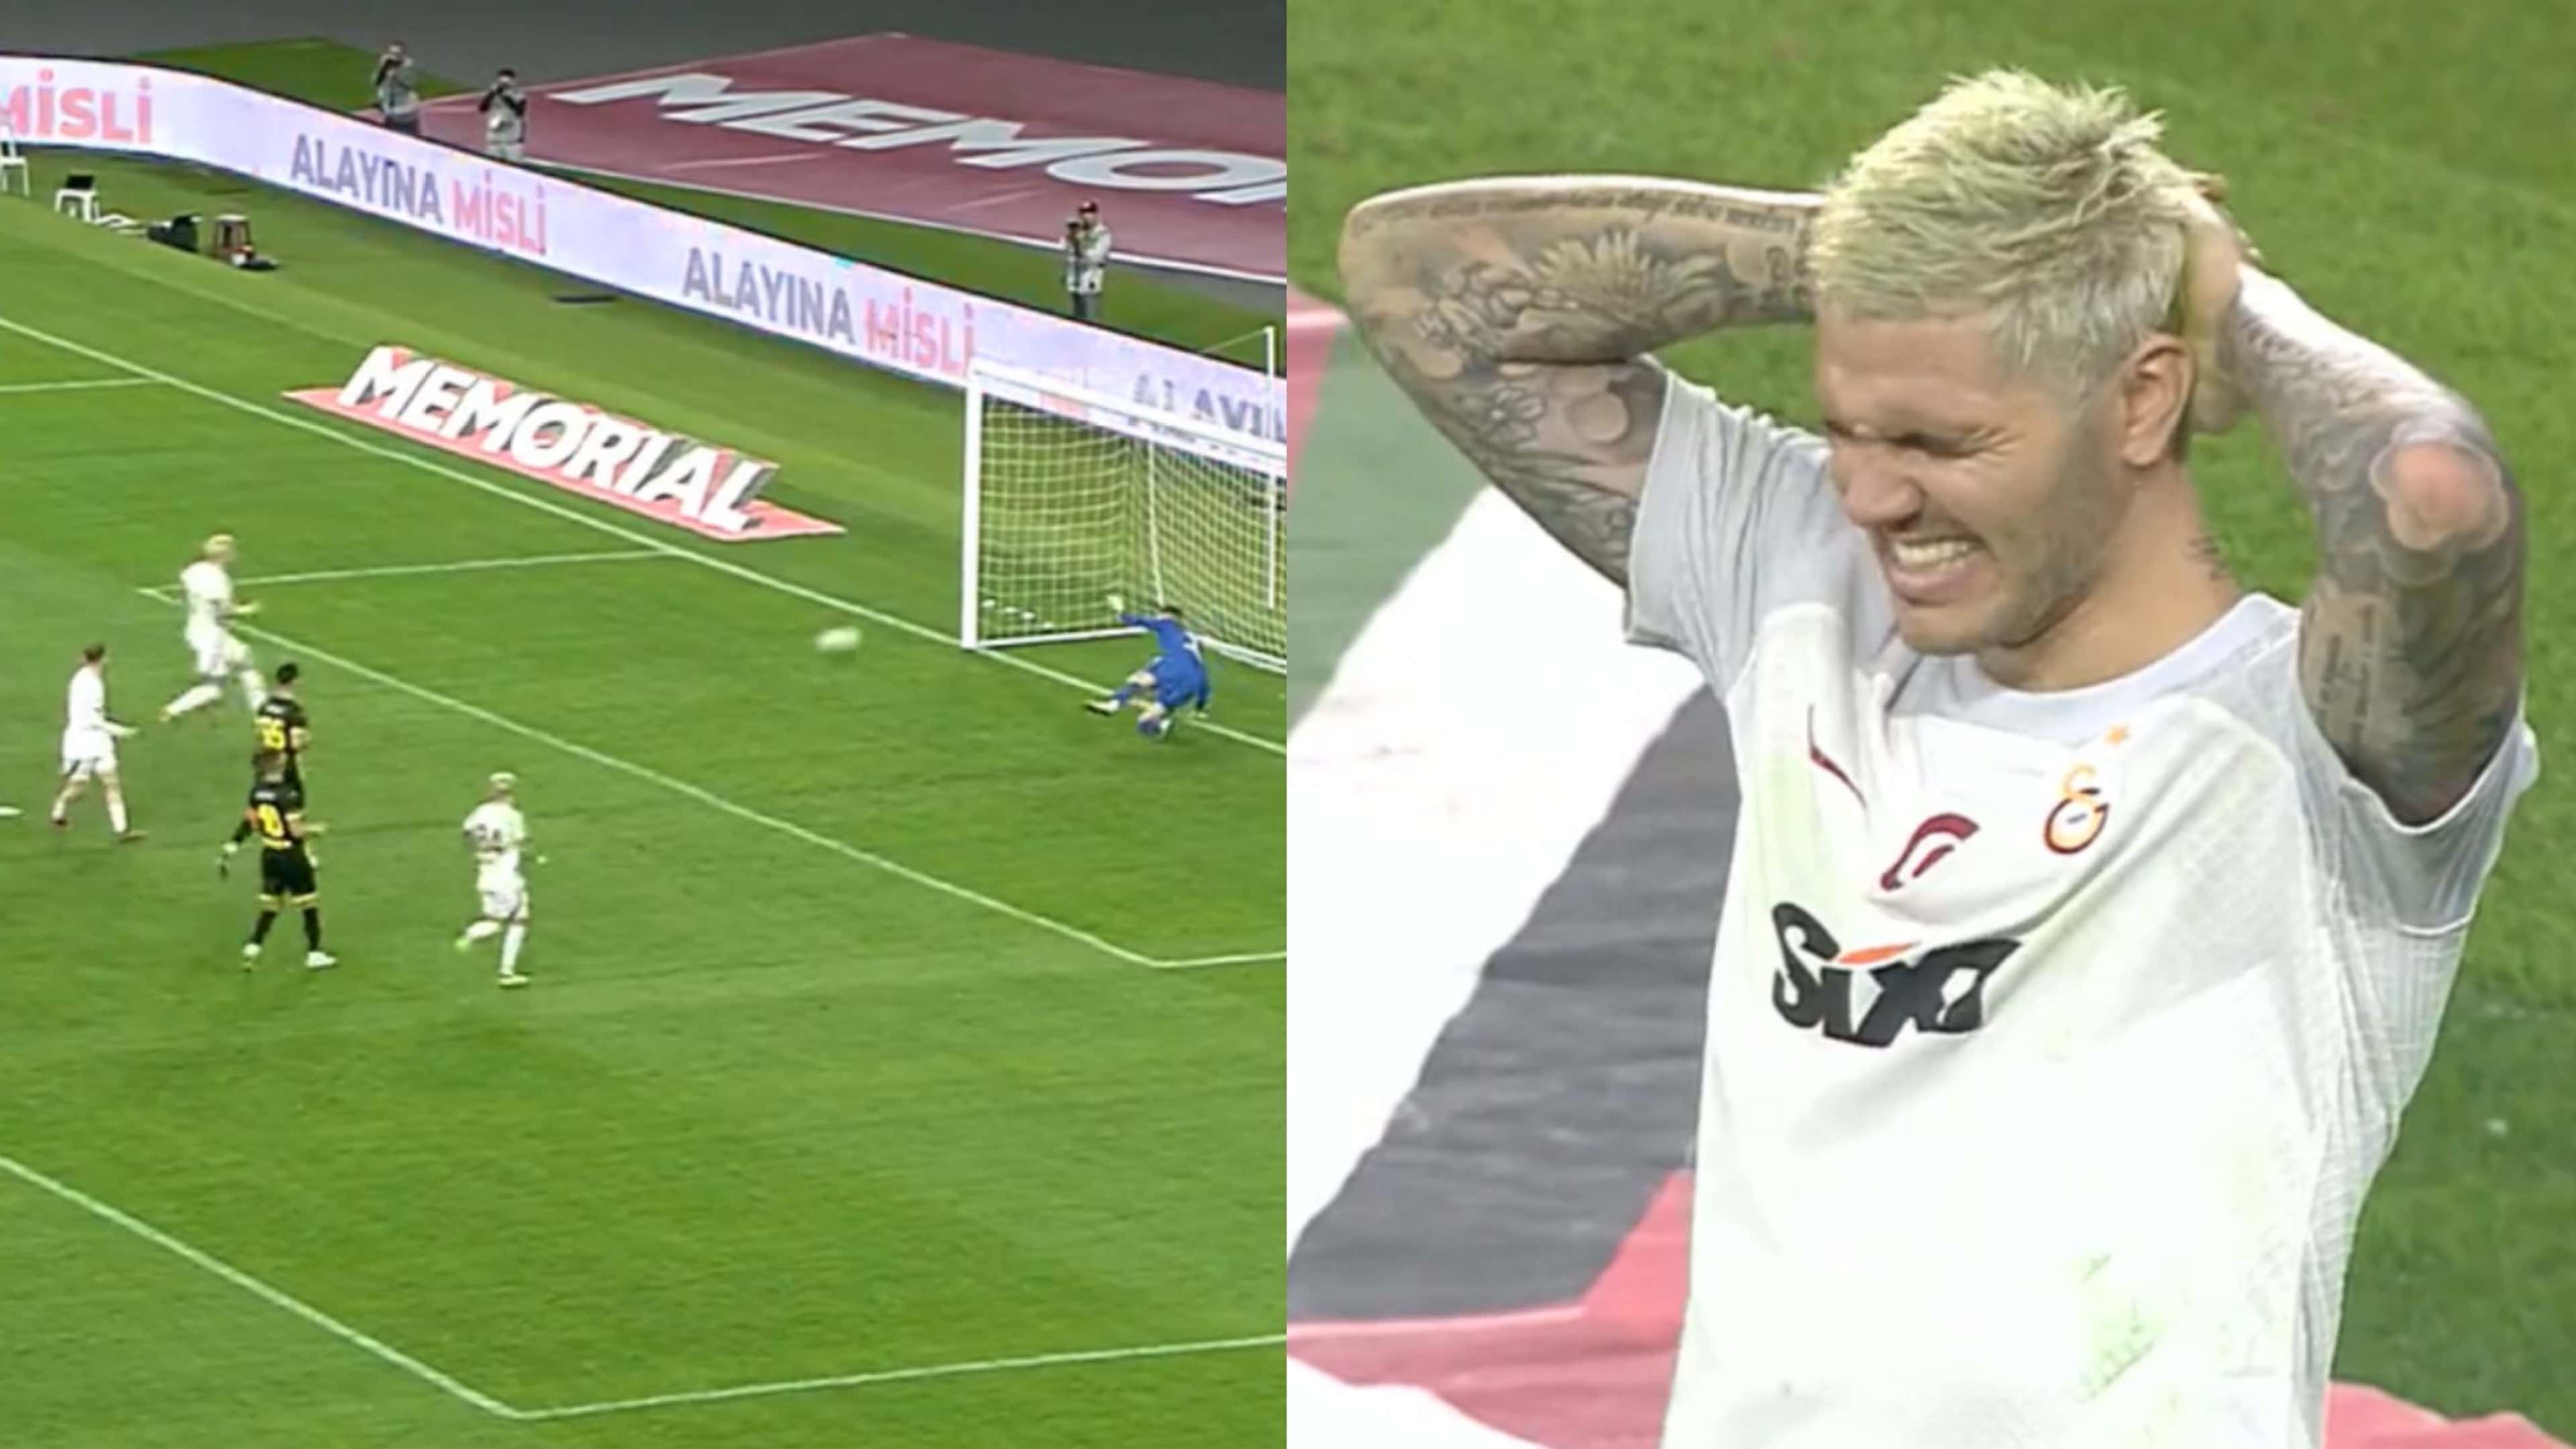 WATCH: The worst miss of the season? Mauro Icardi somehow fails to